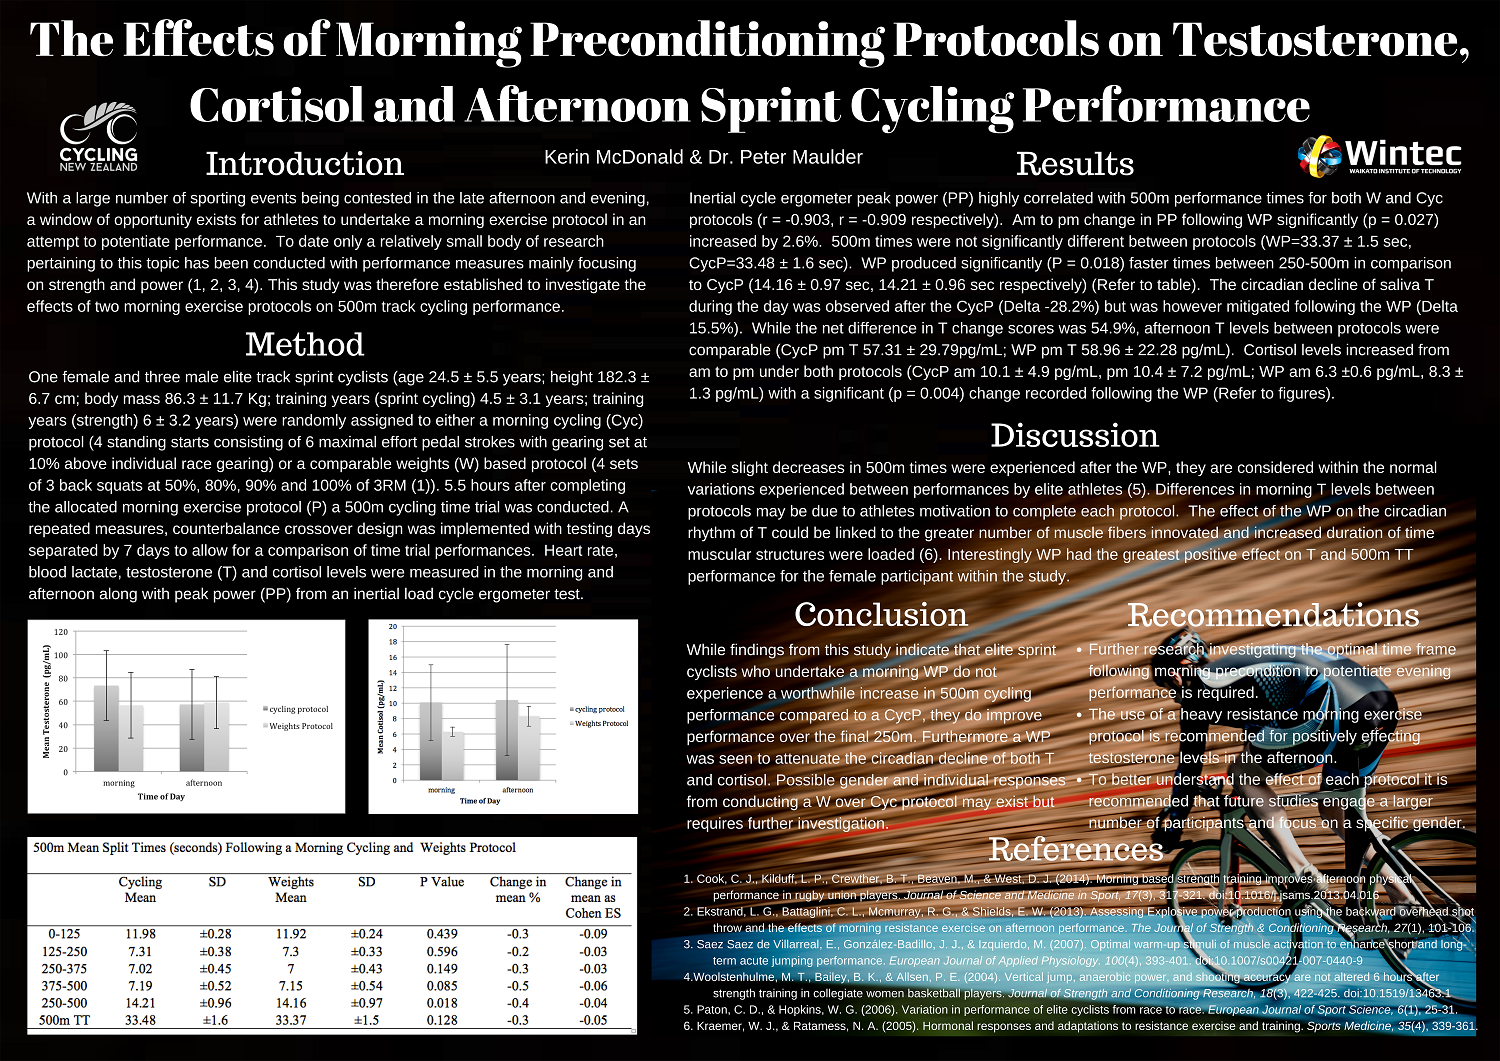 The Effects of Morning Preconditioning Protocols on Testosterone, Cortisol and Afternoon Sprint Cycling Performance